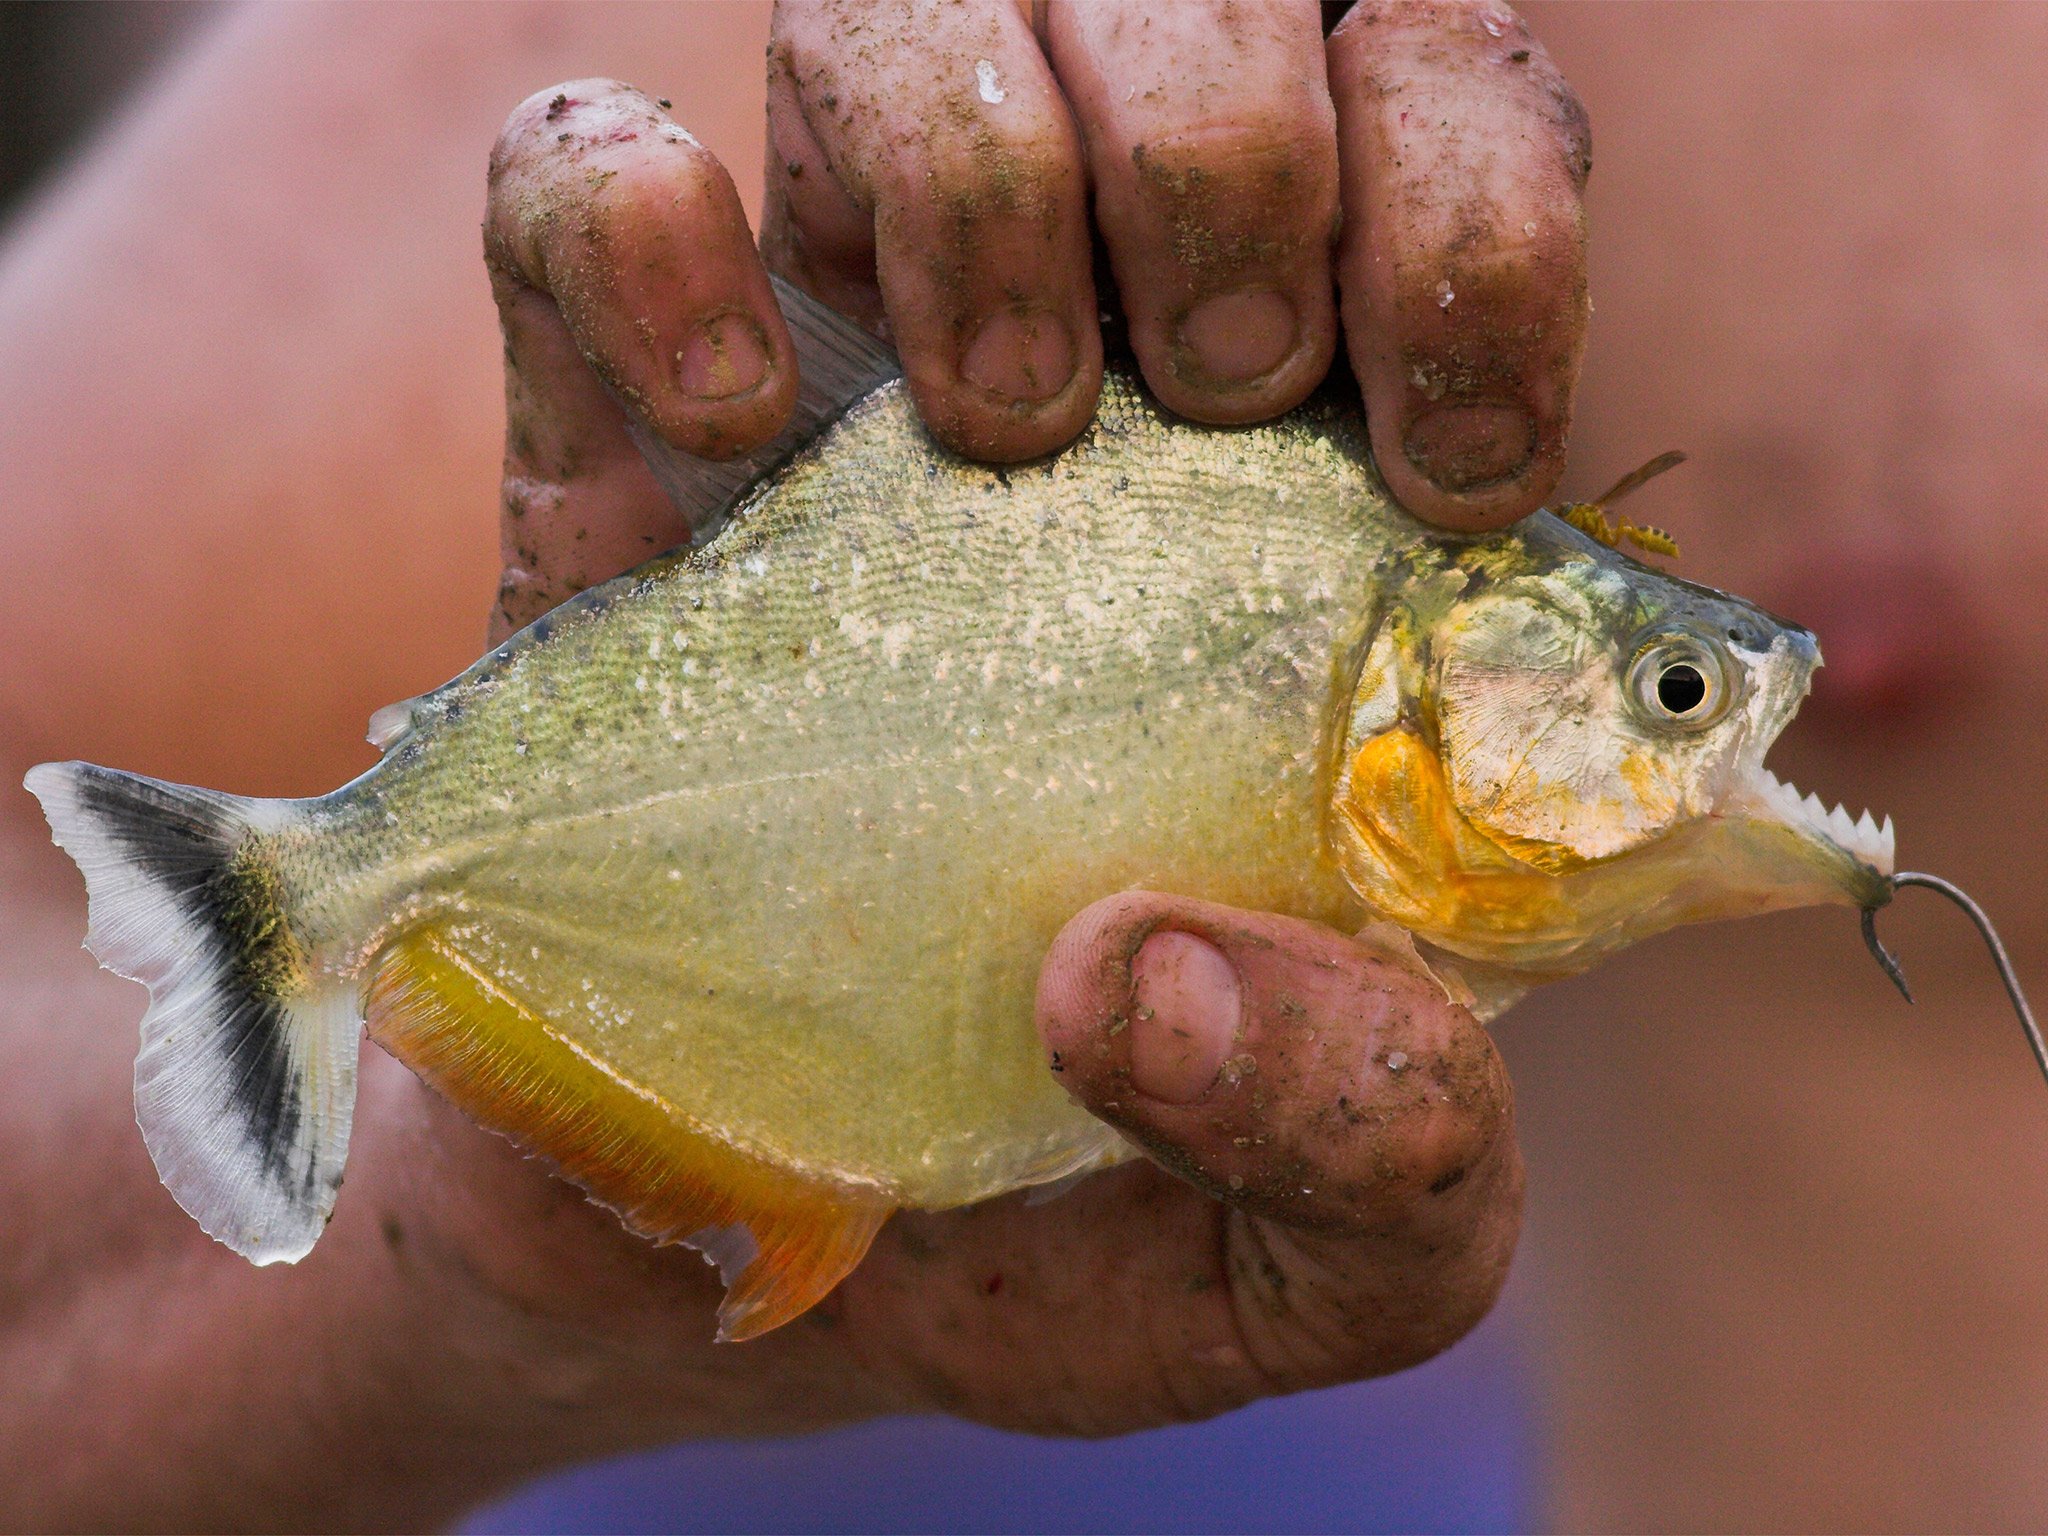 Piranha attacks on swimmers in Brazil leave over 50 people injured ...